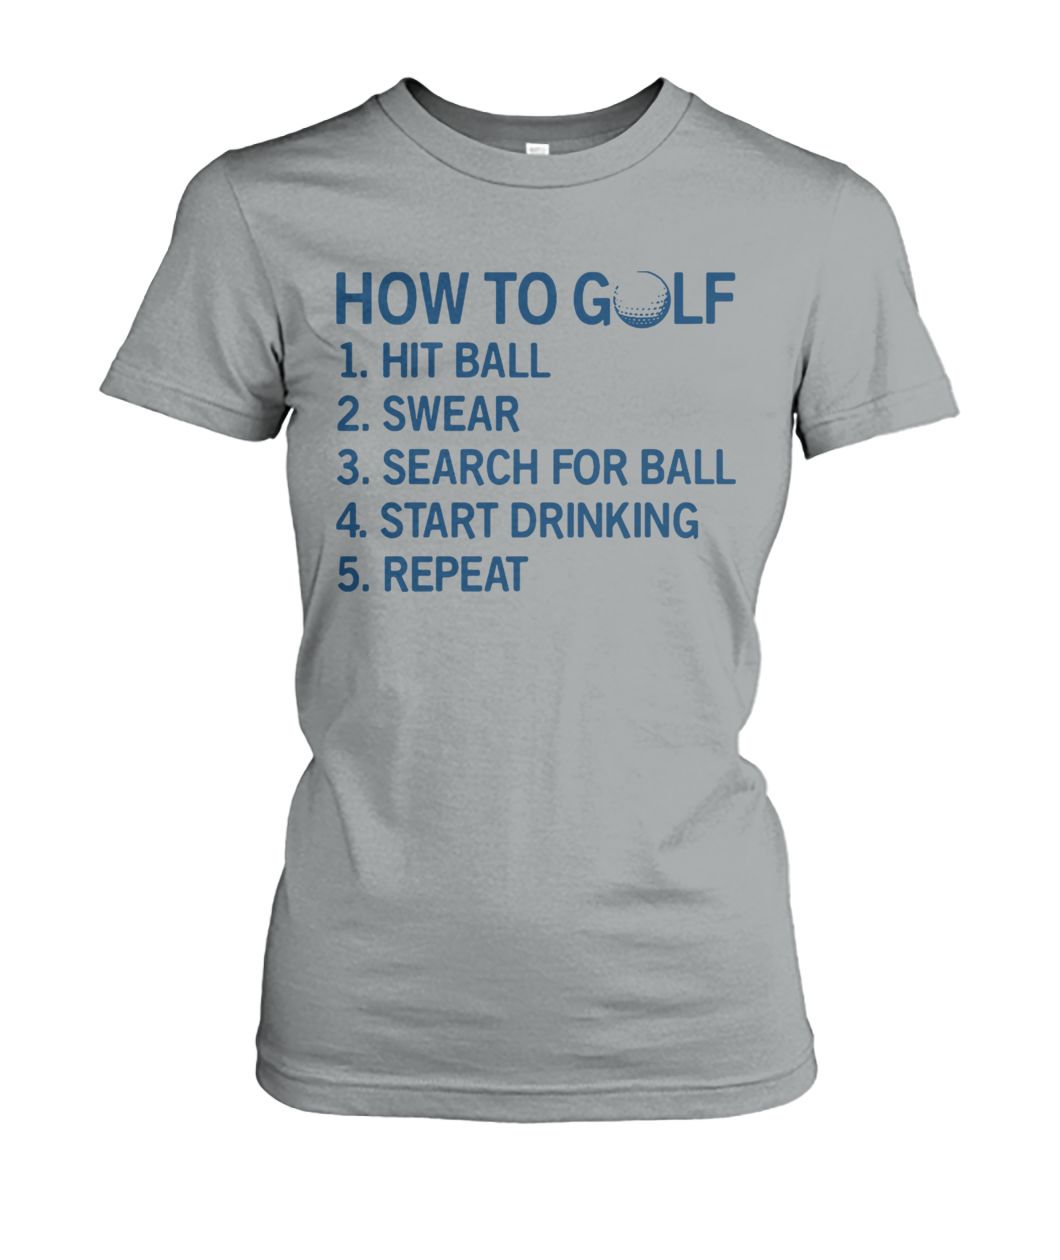 How to golf hit ball swear search for ball start drinking repeat women's crew tee